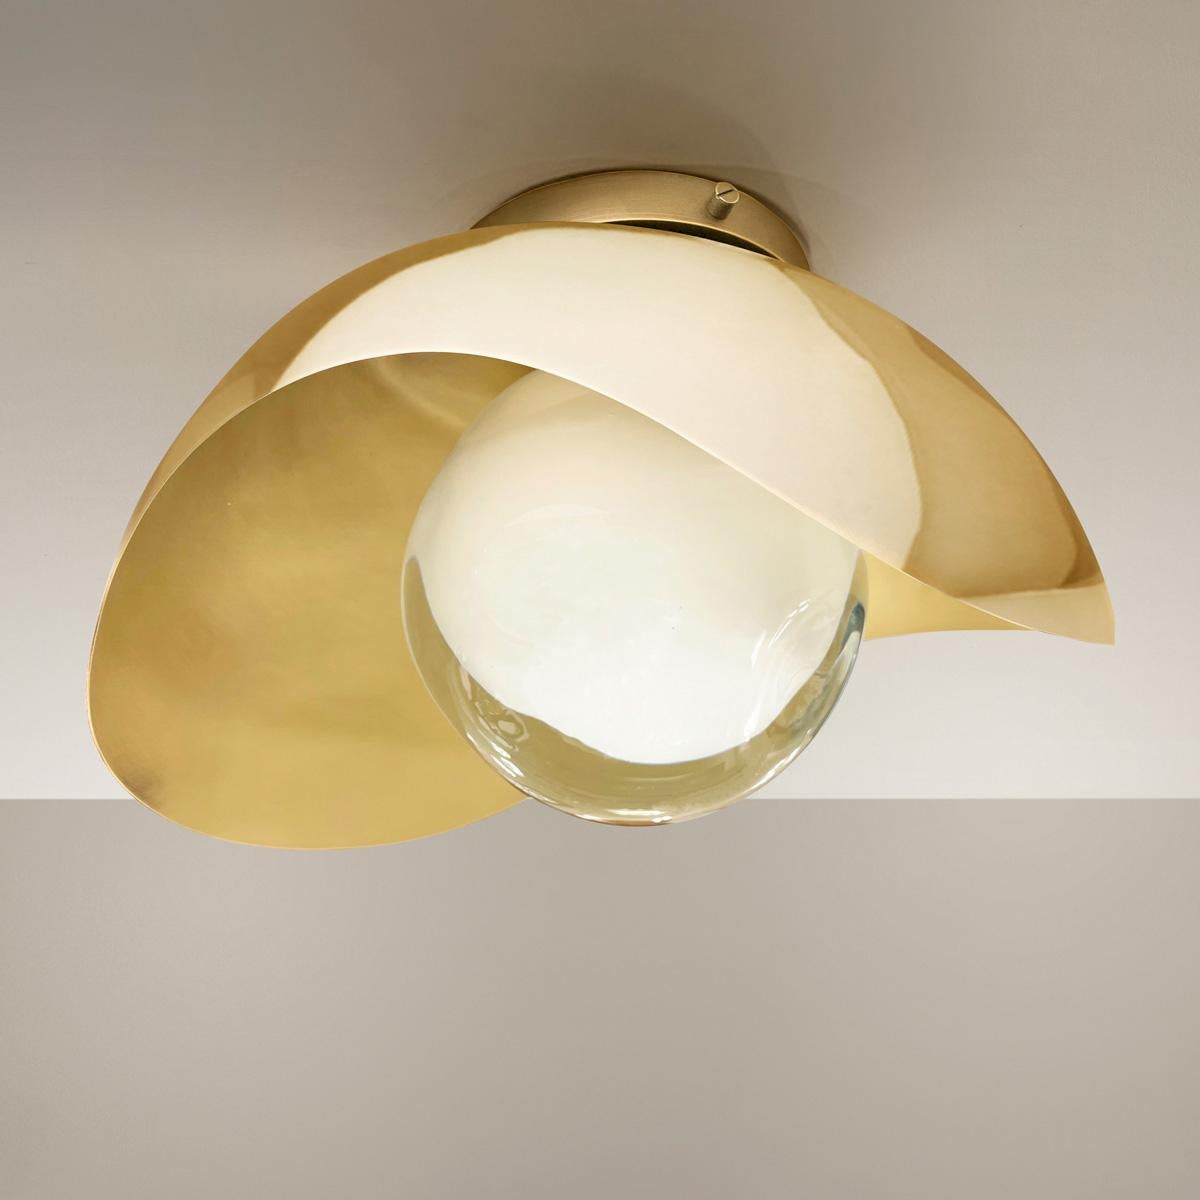 Perla Flushmount Ceiling Light by Gaspare Asaro-Satin Brass/Polished Nickel For Sale 7